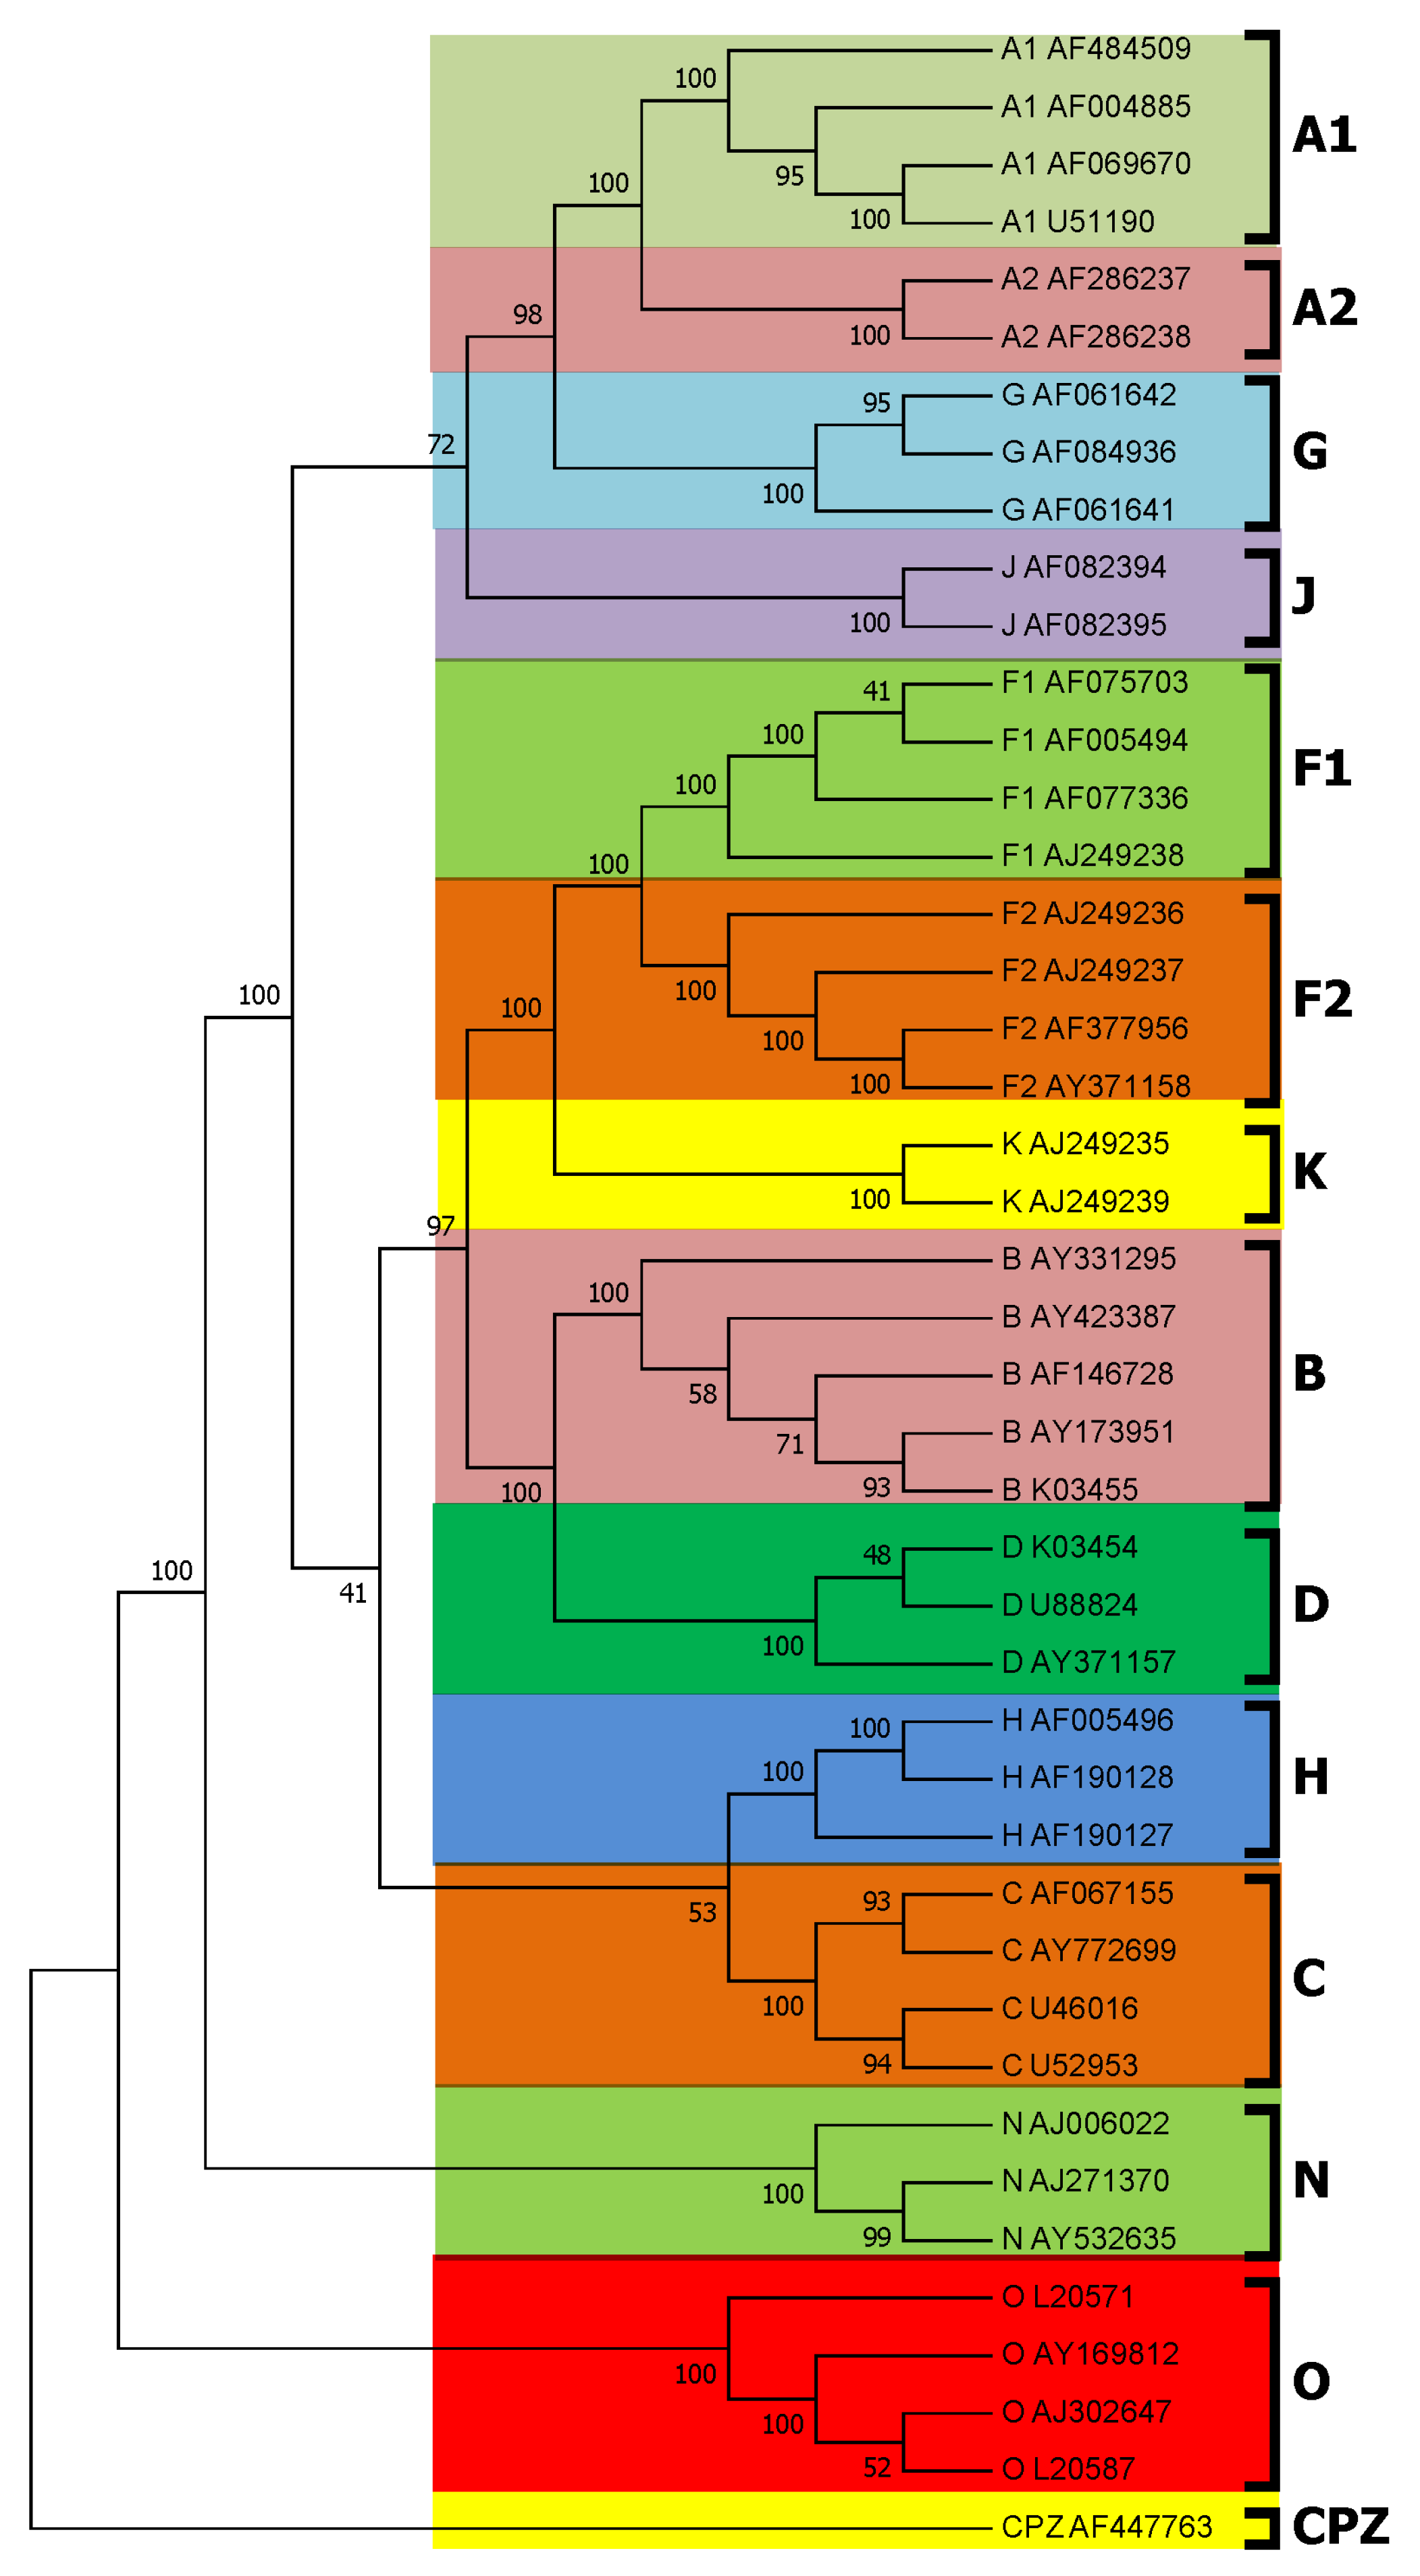 Entropy Free Full Text Phylogenetic Analysis Of Hiv 1 Genomes Based On The Position Weighted 5932